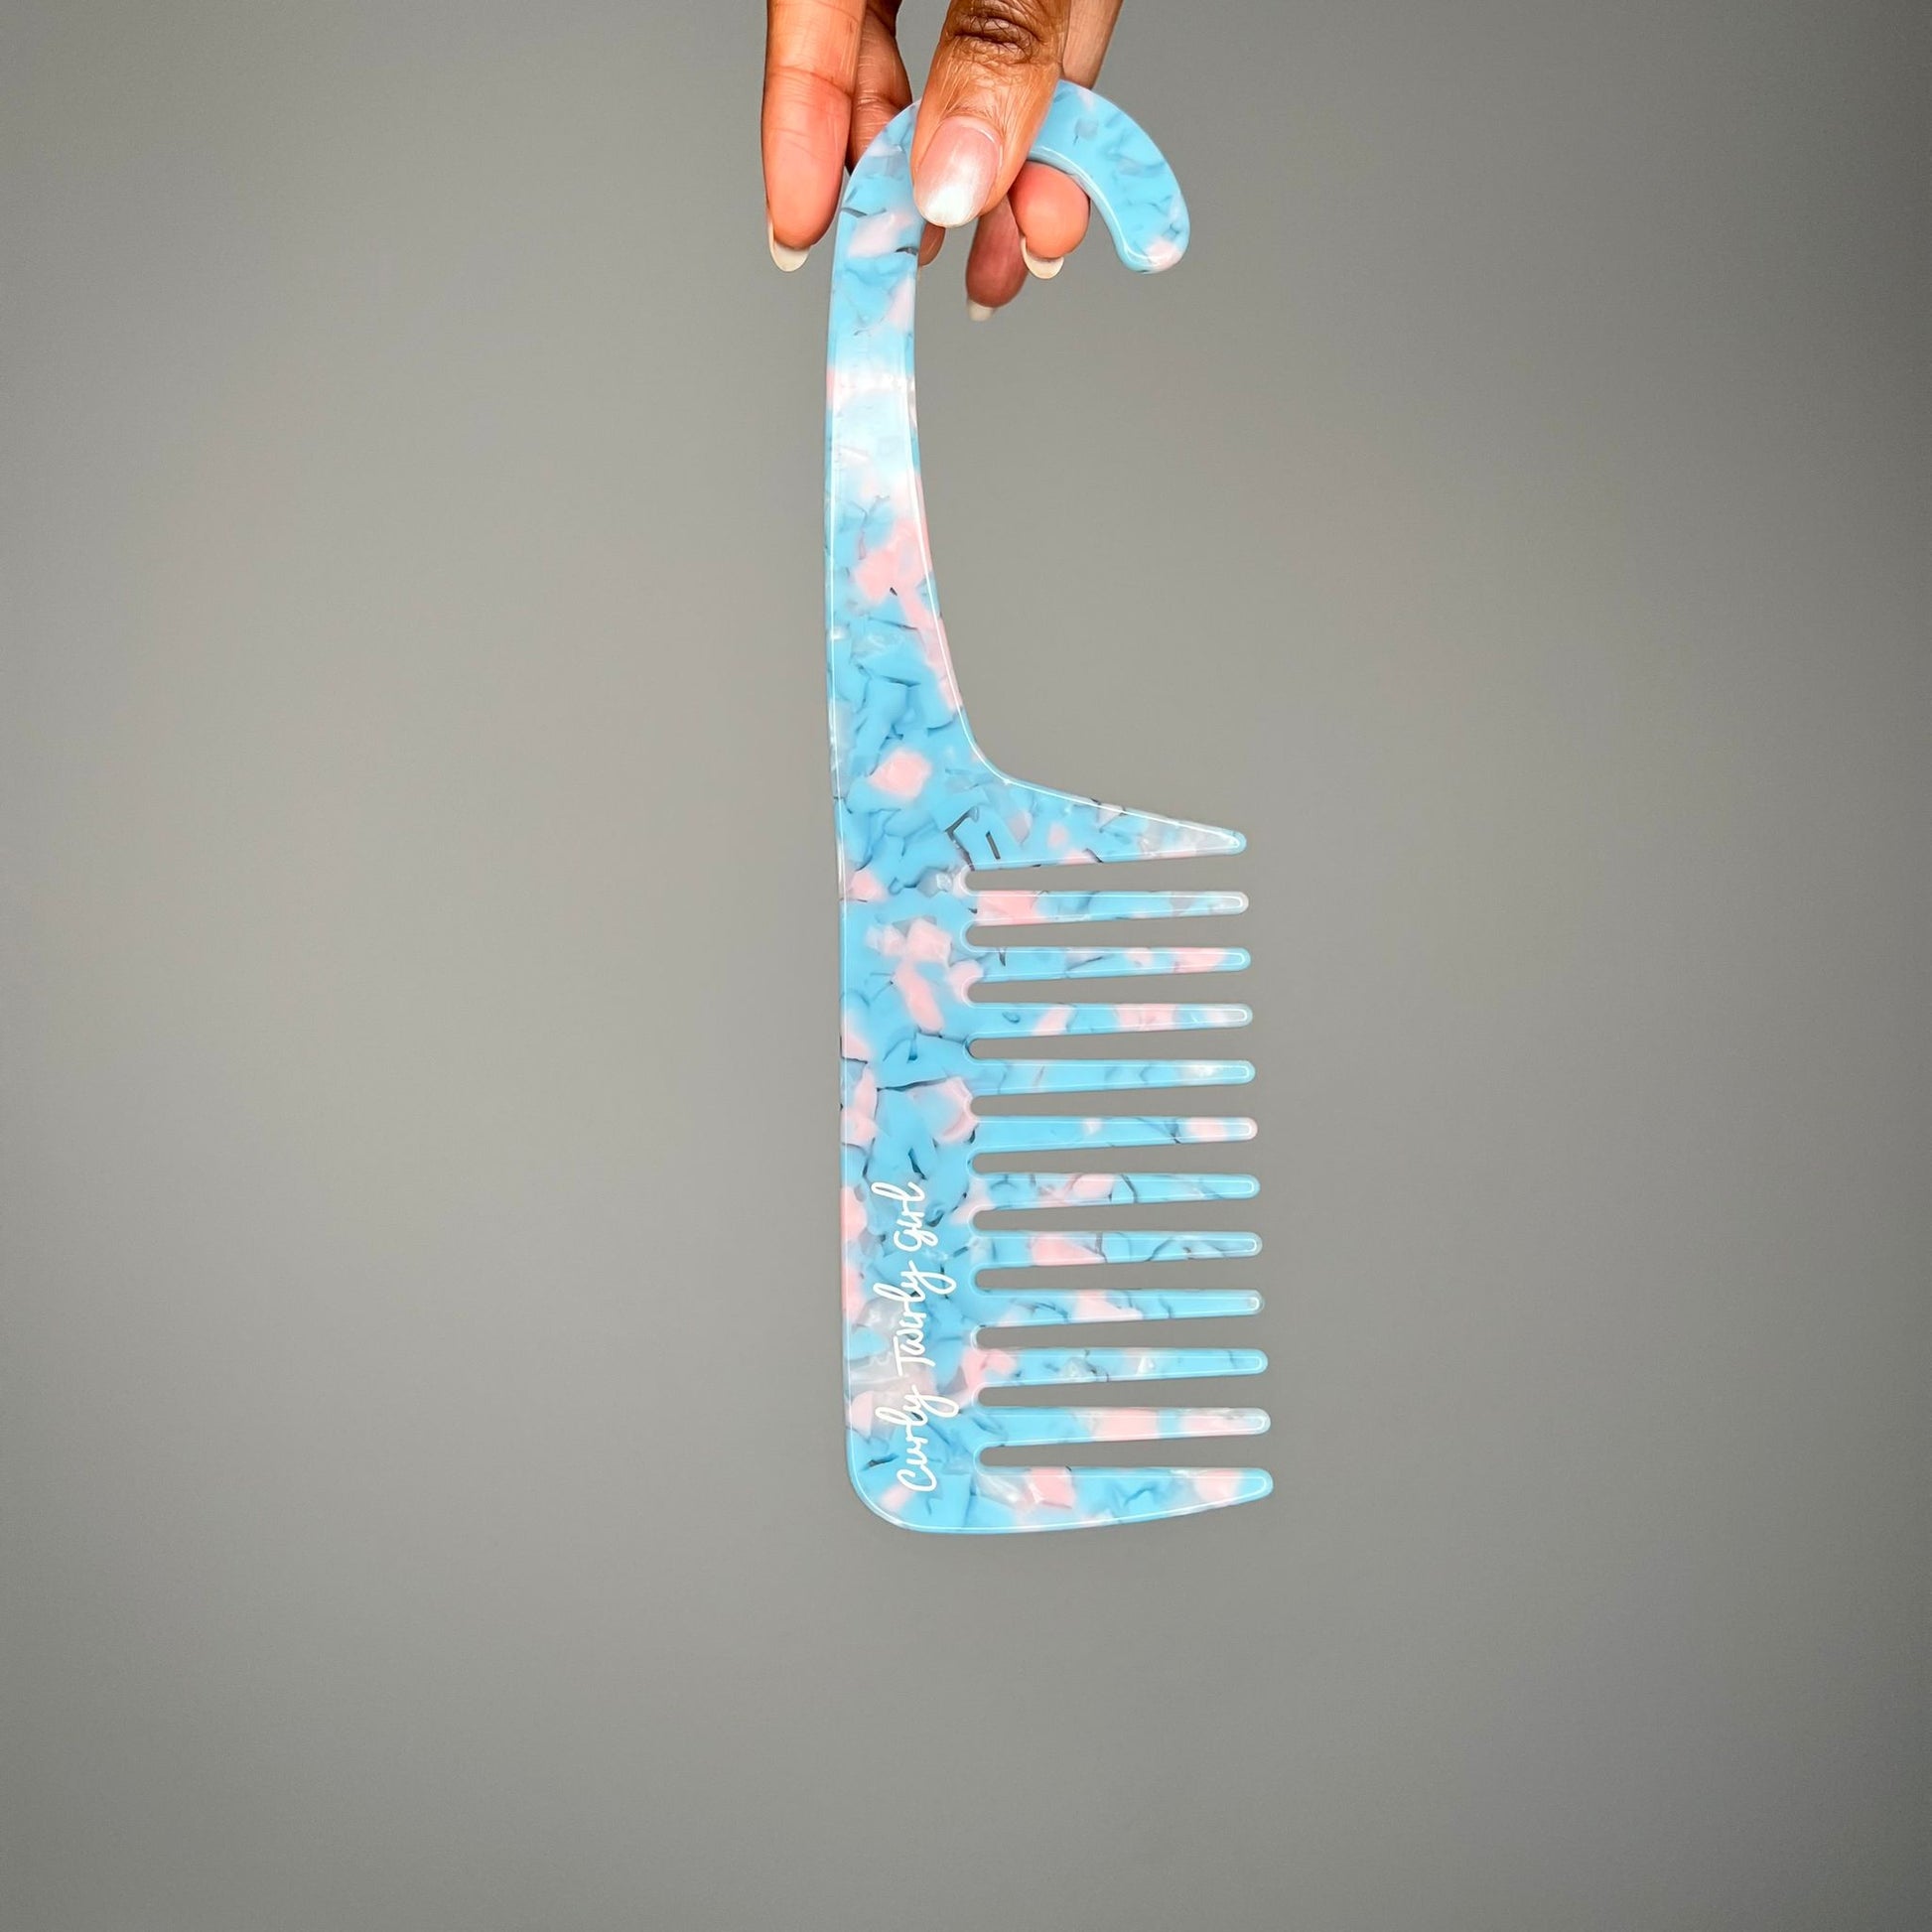 Hand holding a blue wide tooth shower comb